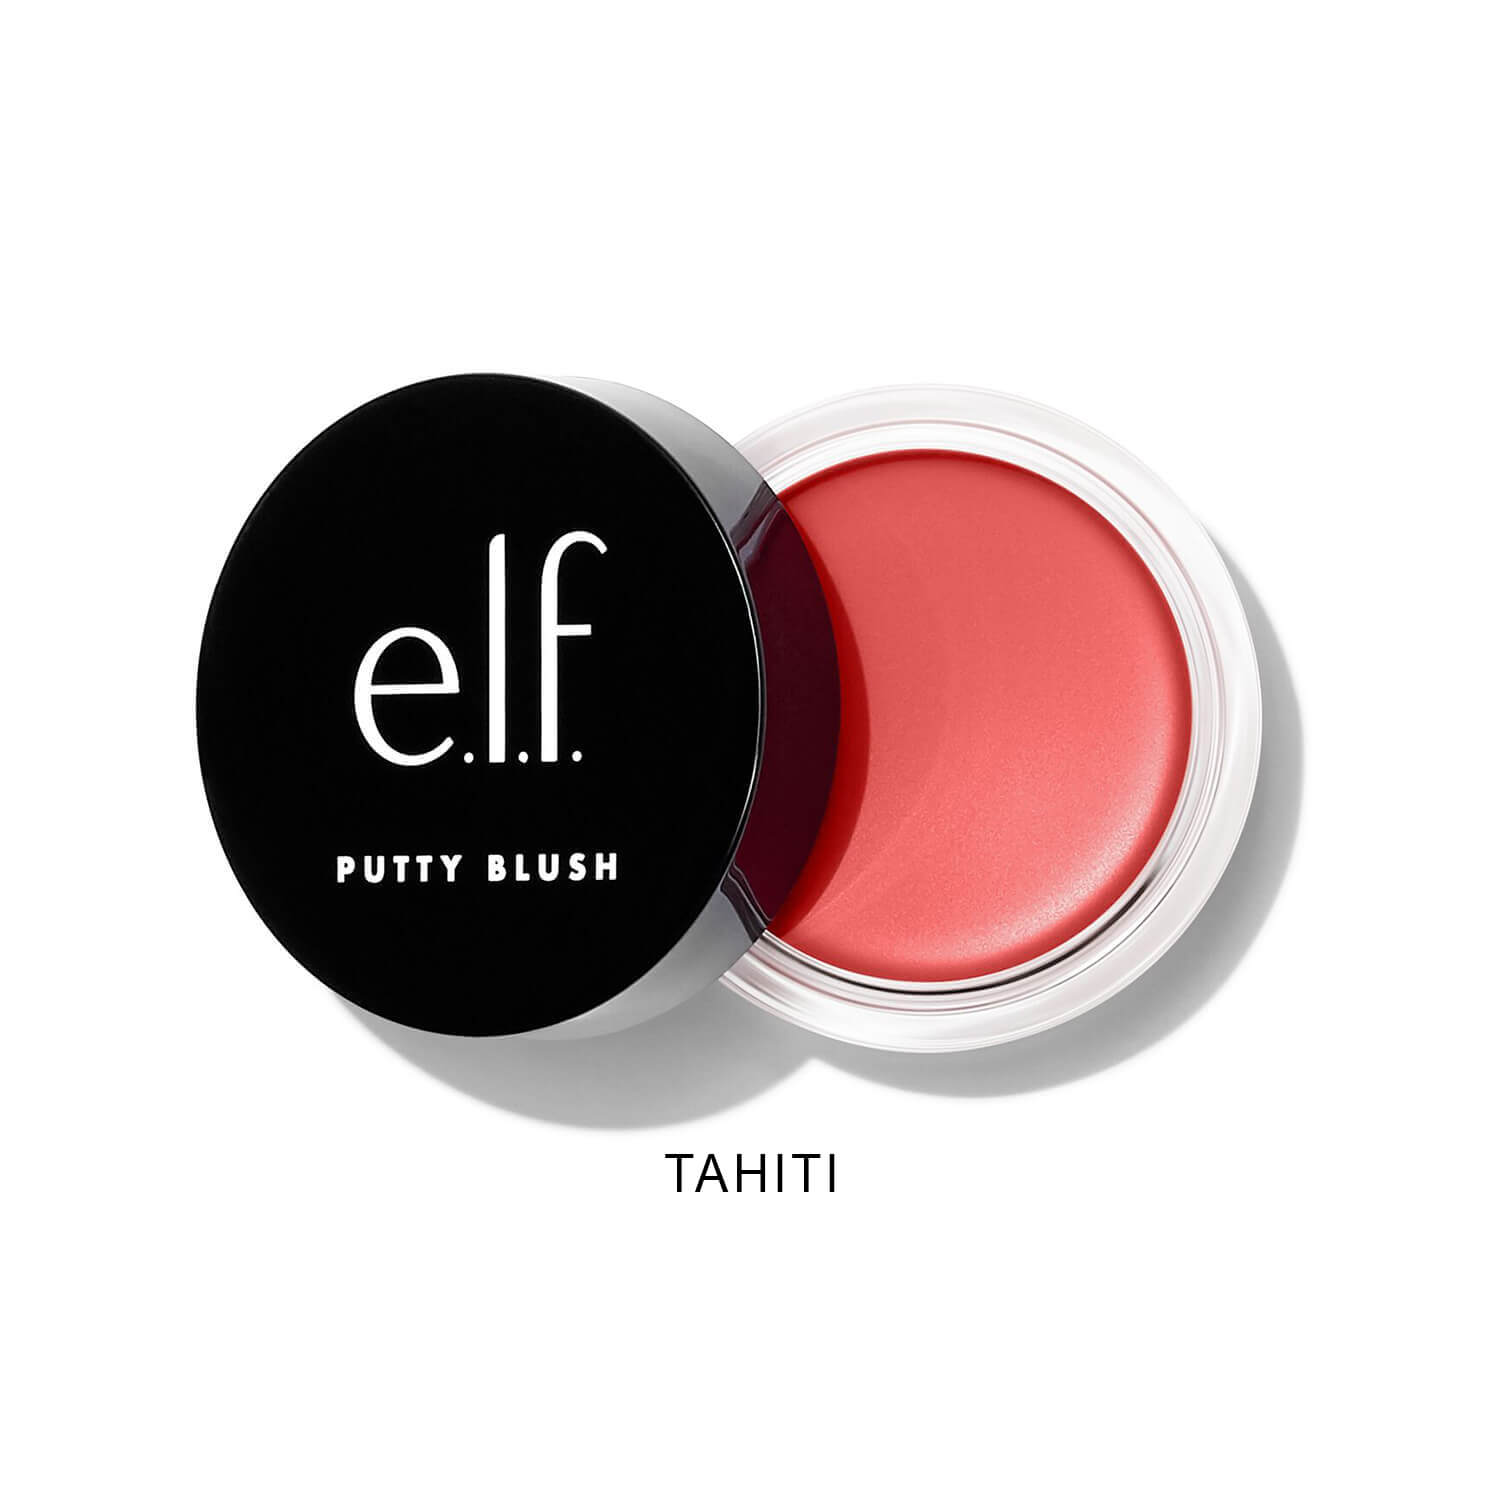 Shop elf putty blush in Tahiti shade available at Heygirl.pk for delivery in Pakistan